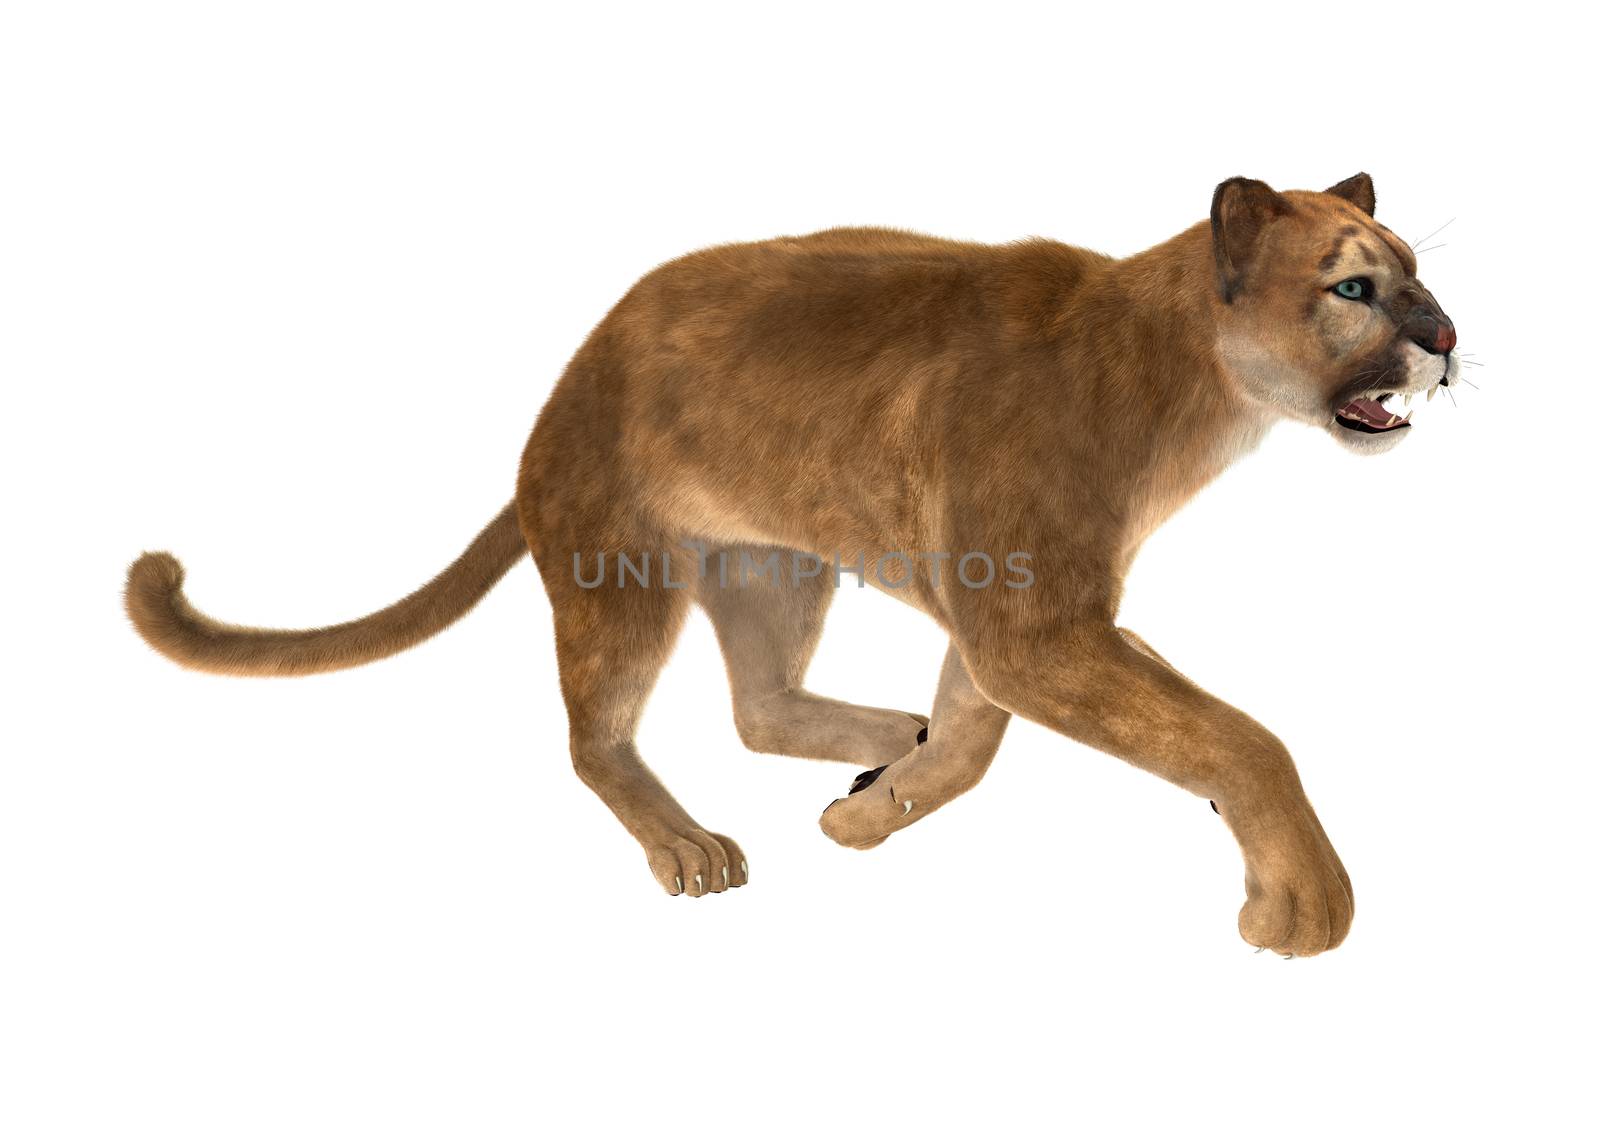 3D digital render of a big cat puma running iisolated on white background